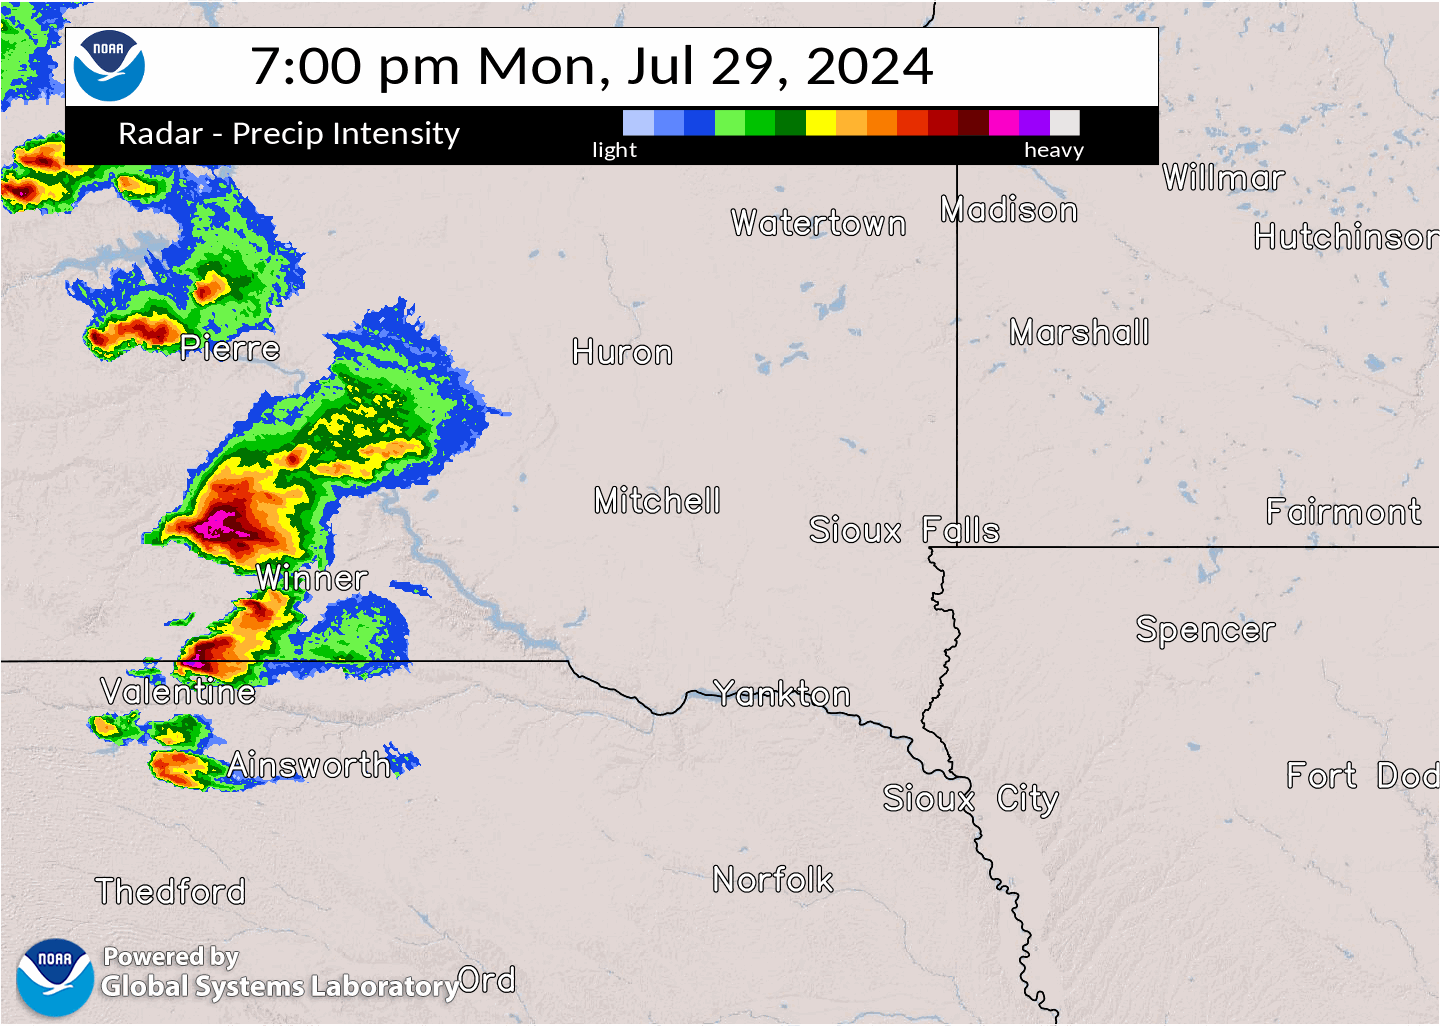 Radar loop from 7 PM Monday to 1 AM Tuesday. A semi-organized cluster of storms moves across south central SD, developing into a much more organized bowing line as it moved through Siouxland after 11 PM Monday evening.